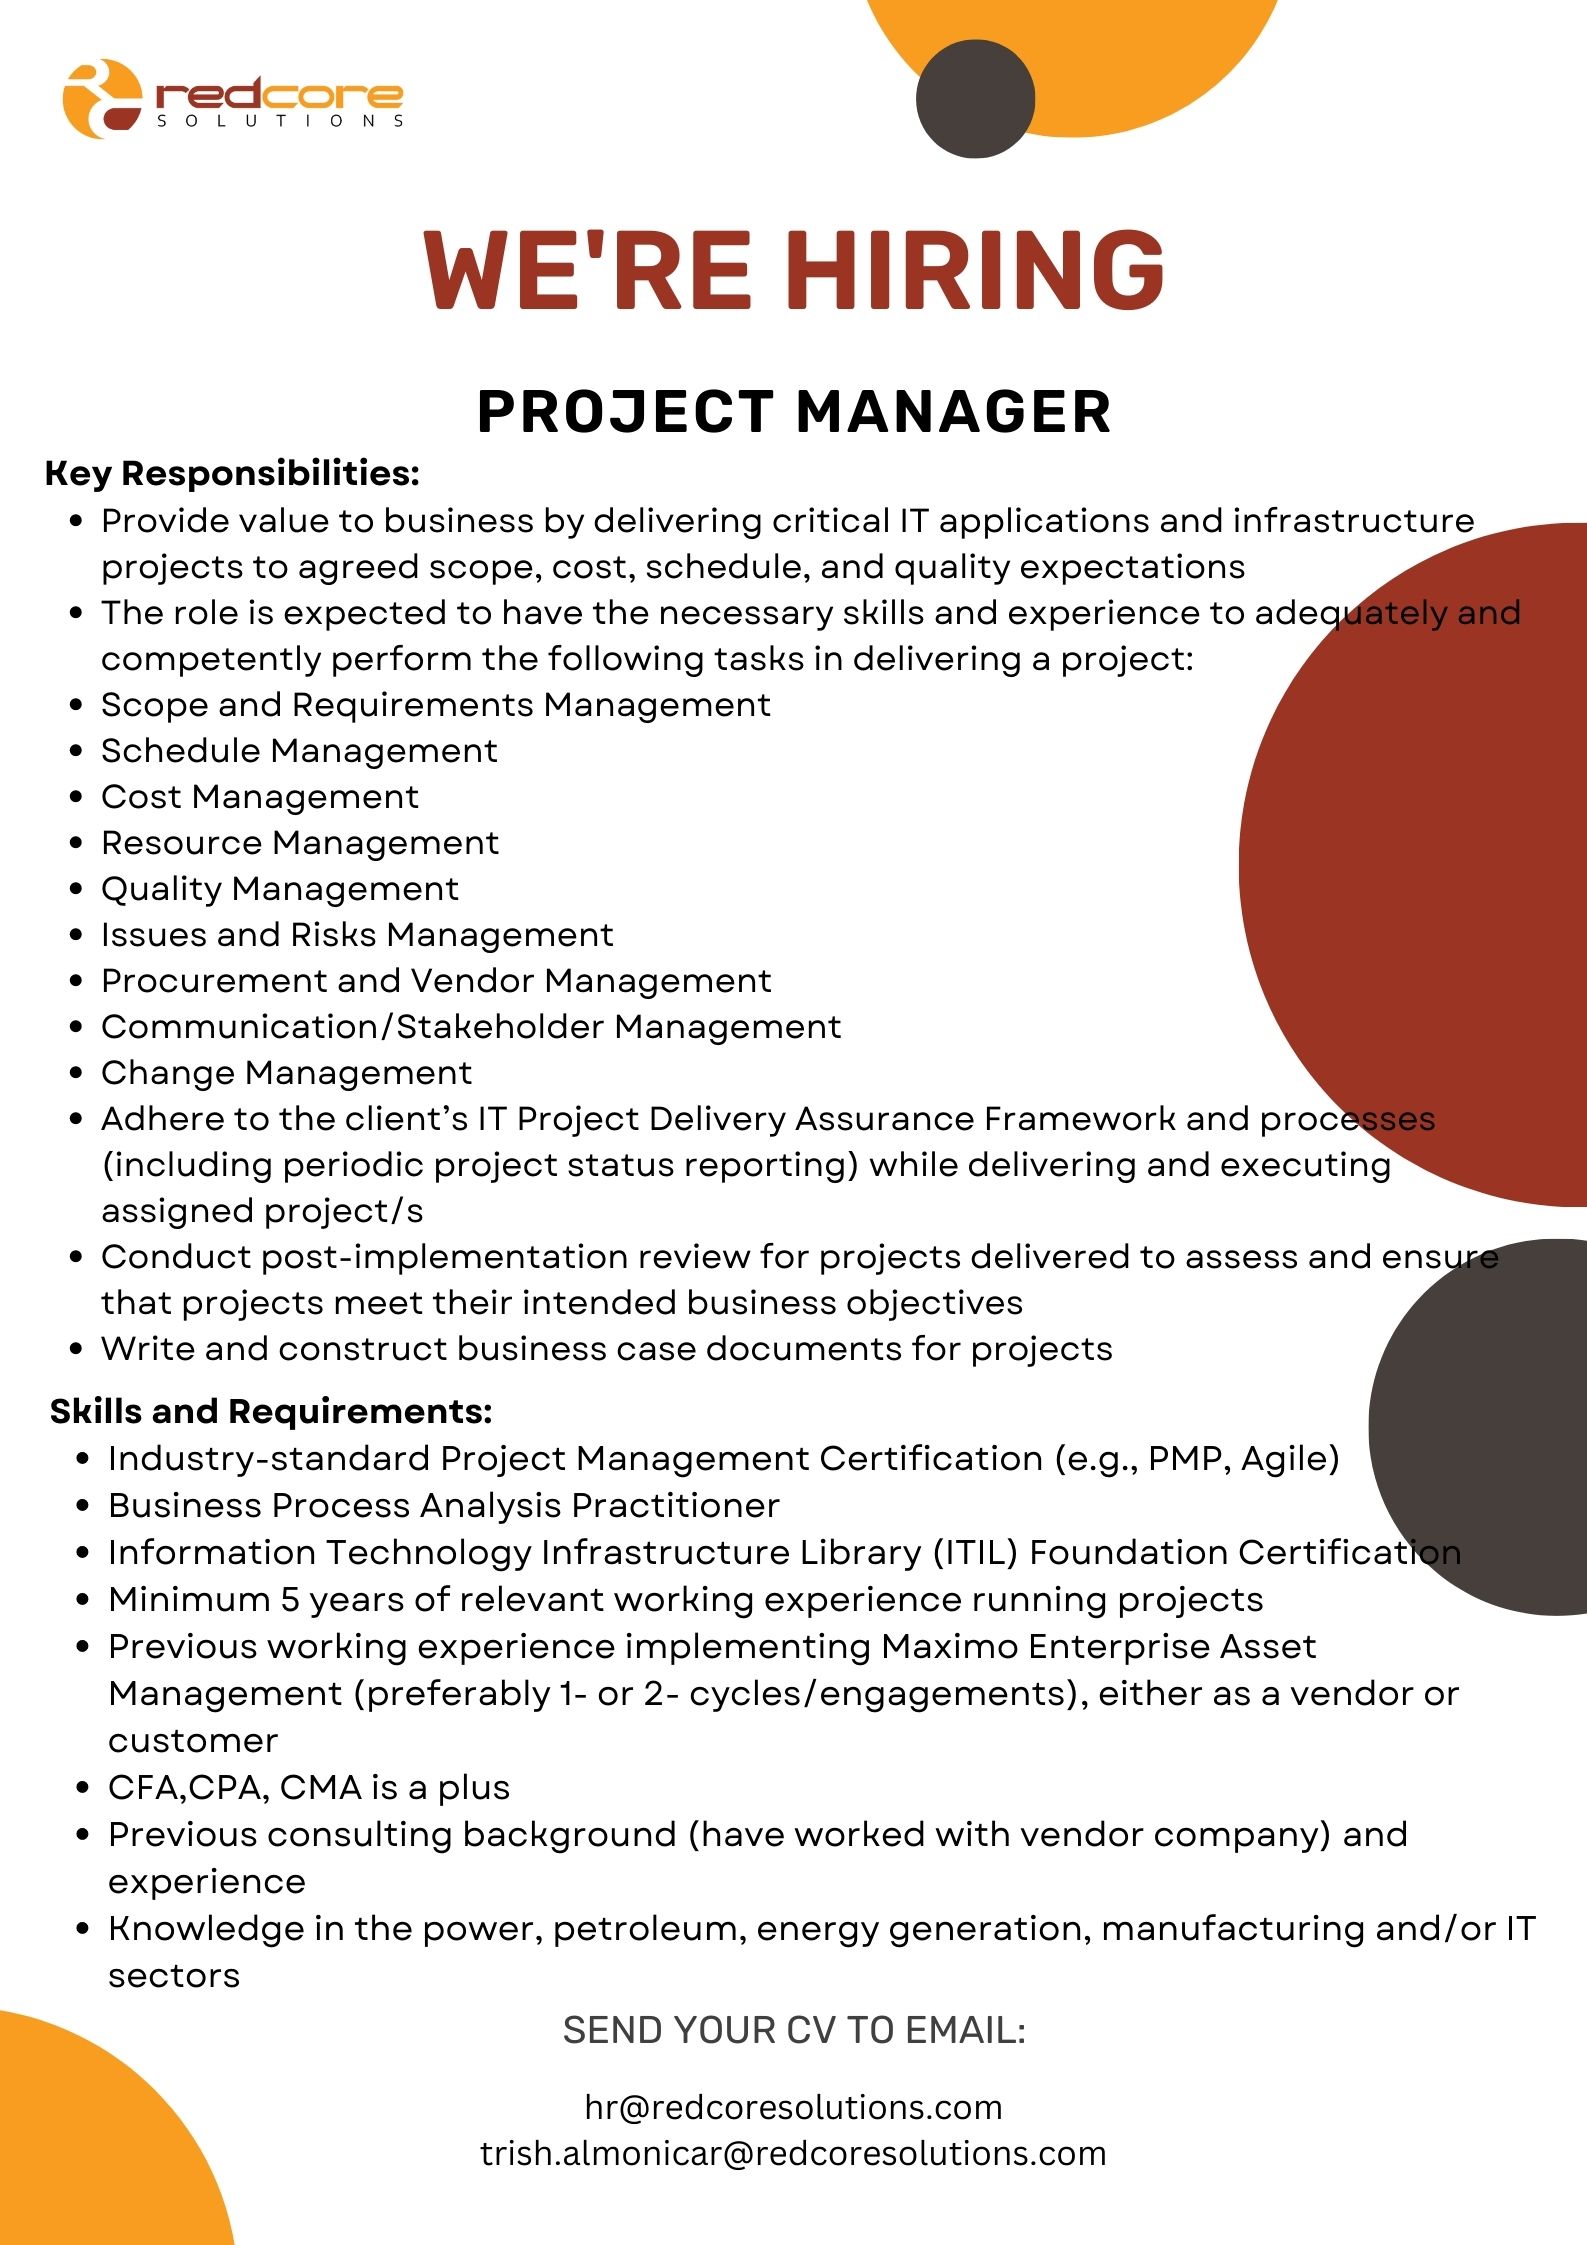 We’re Hiring! Project Manager